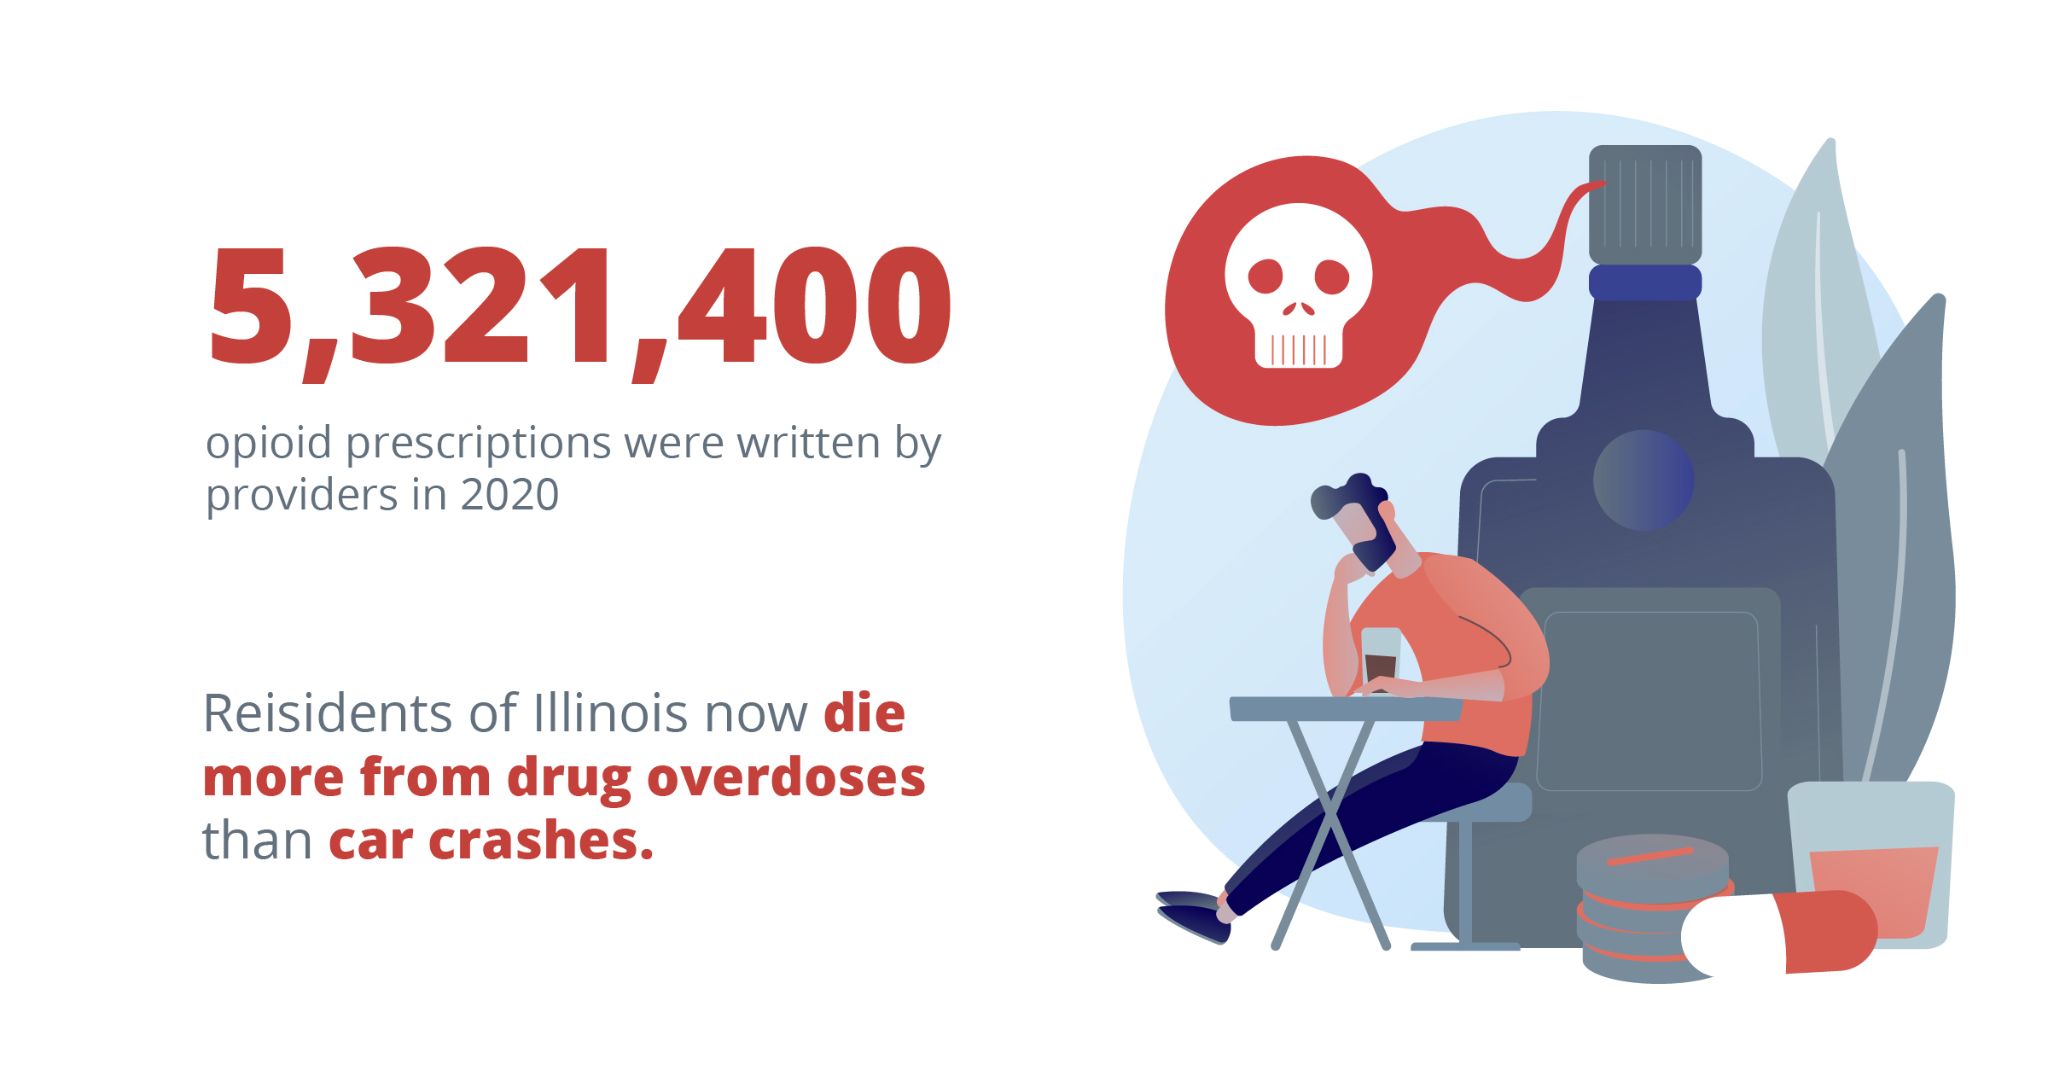 5,321,400 opioid prescriptions were written by providers in 2020. Residents of illinois now die more from drug overdoses than car crashes. Drug And Alcohol Detox & Rehab, Addiction Treatment Resources in Carbondale Illinois